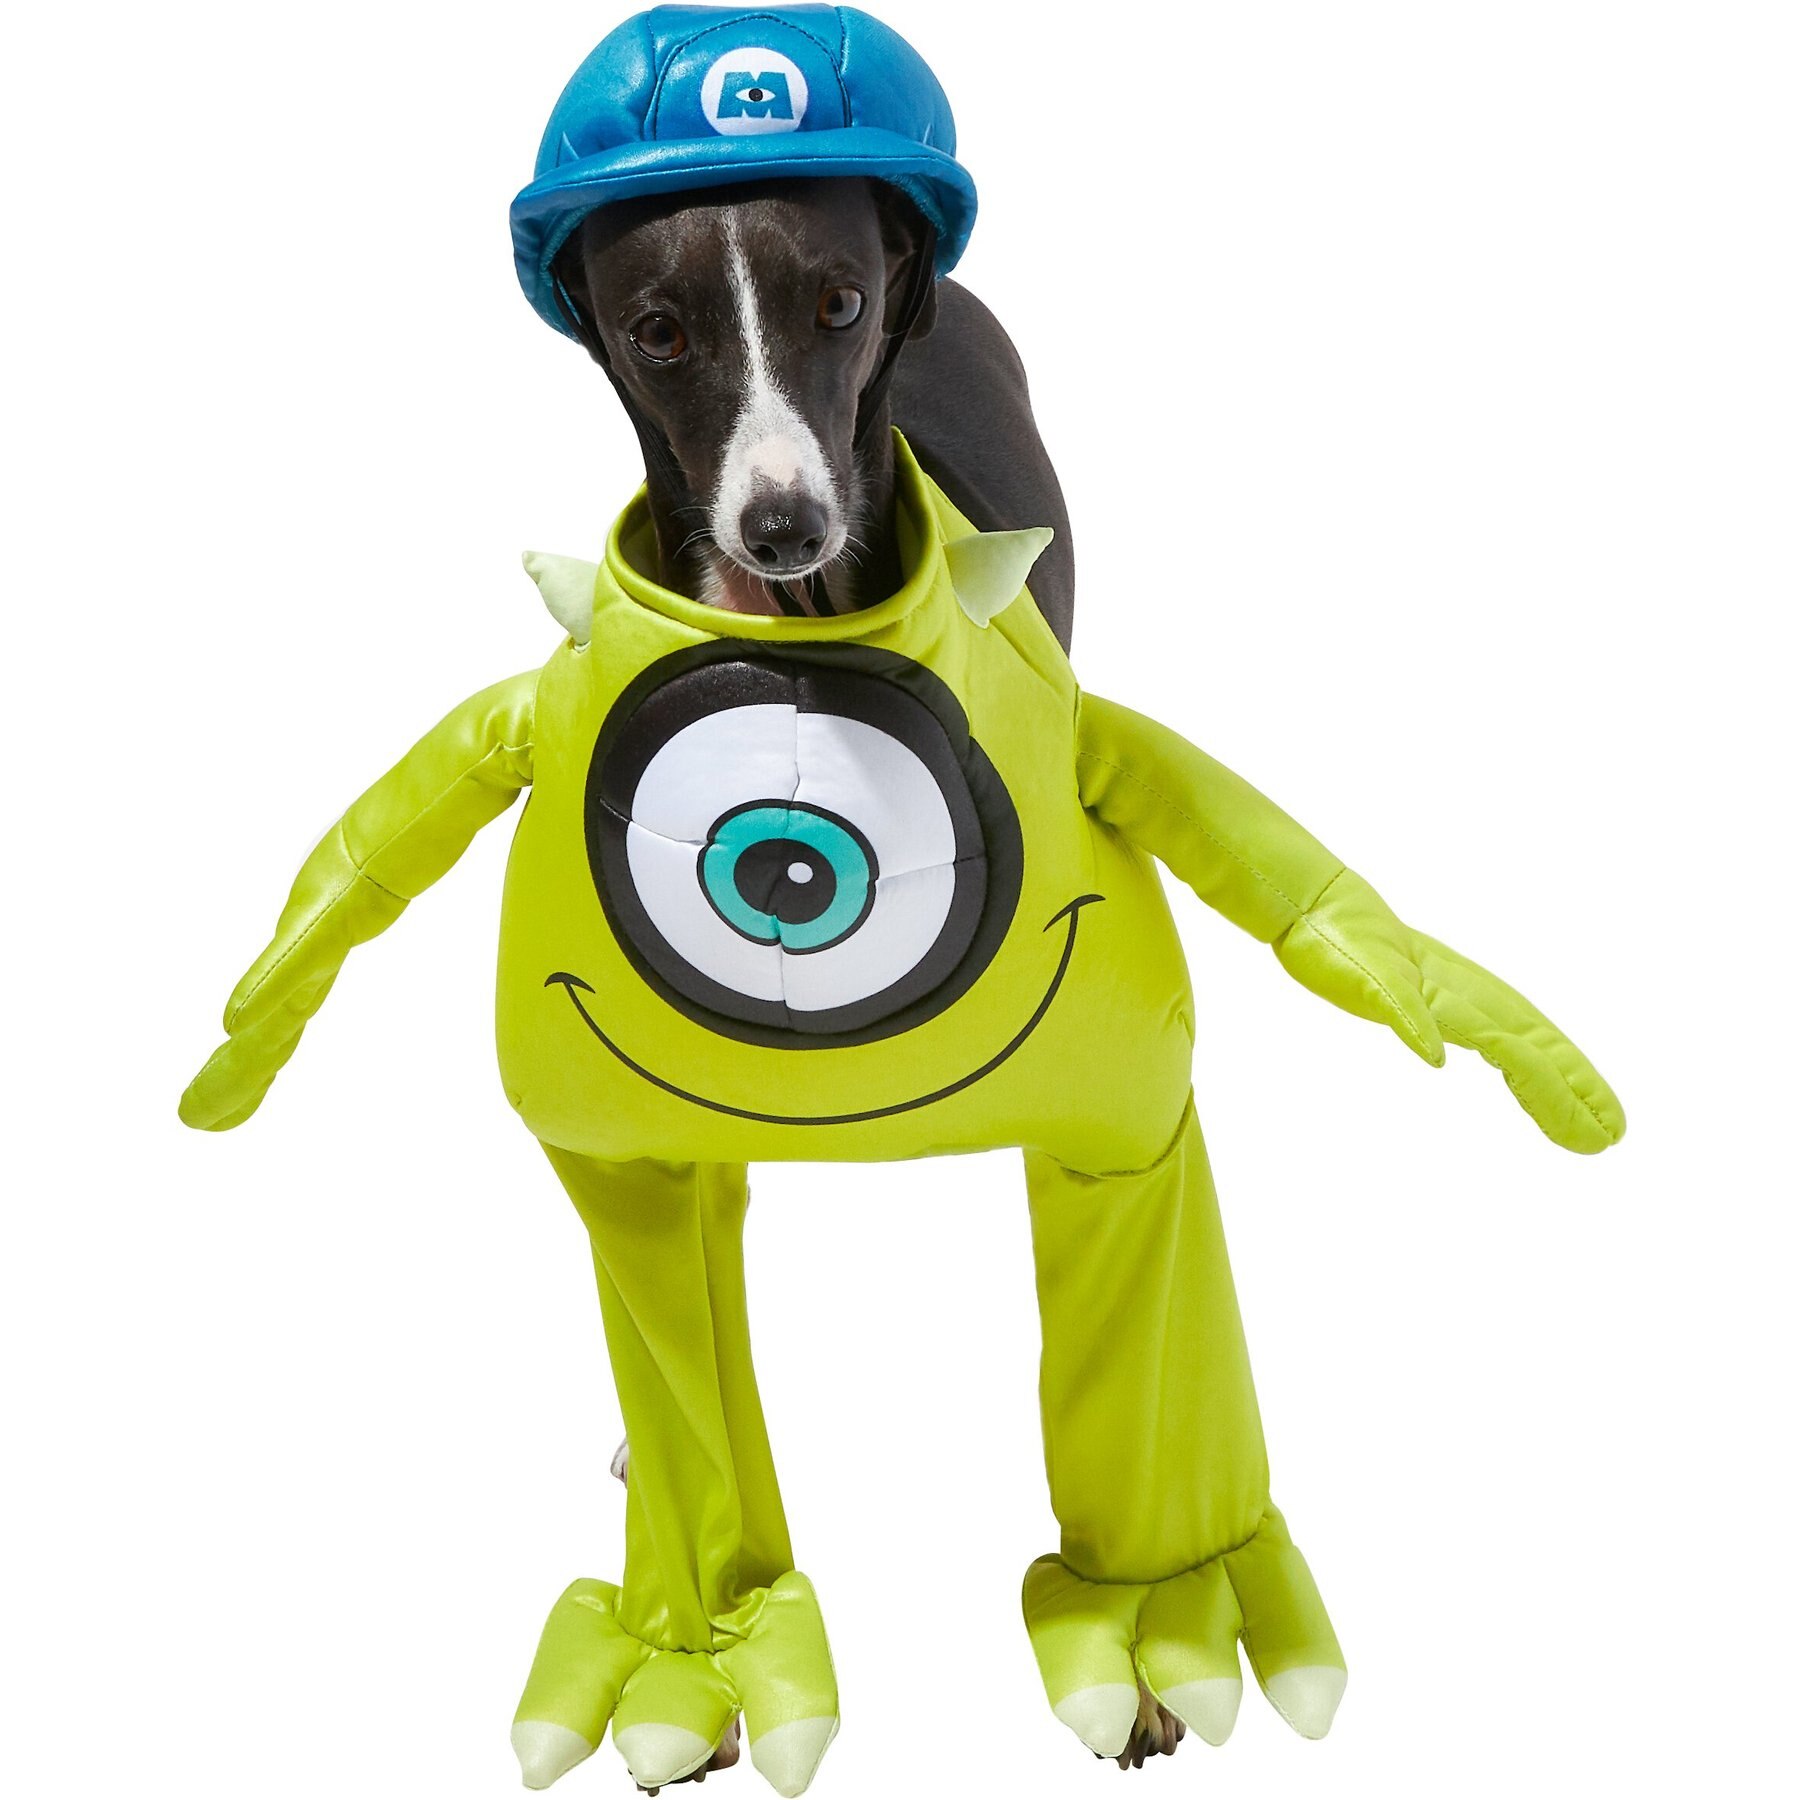 RUBIE'S COSTUME COMPANY Monsters, Inc. Mike Dog Costume, Large - Chewy.com